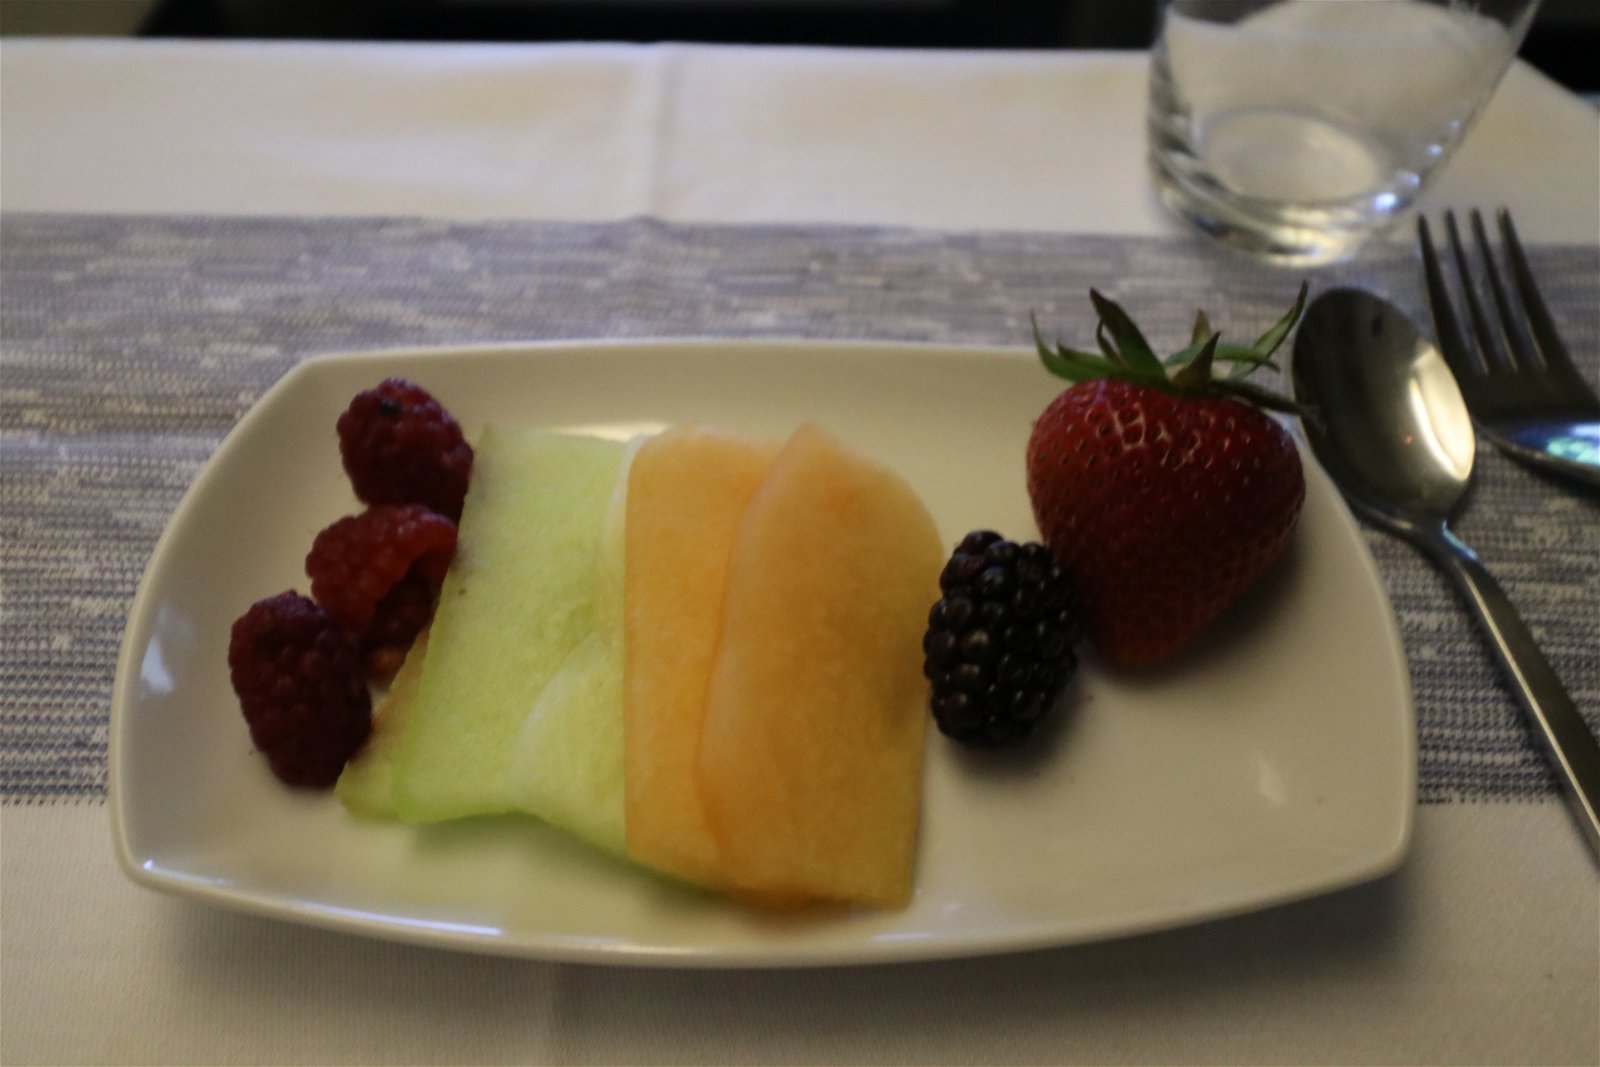 Dessert was a simple fruit plate for me.